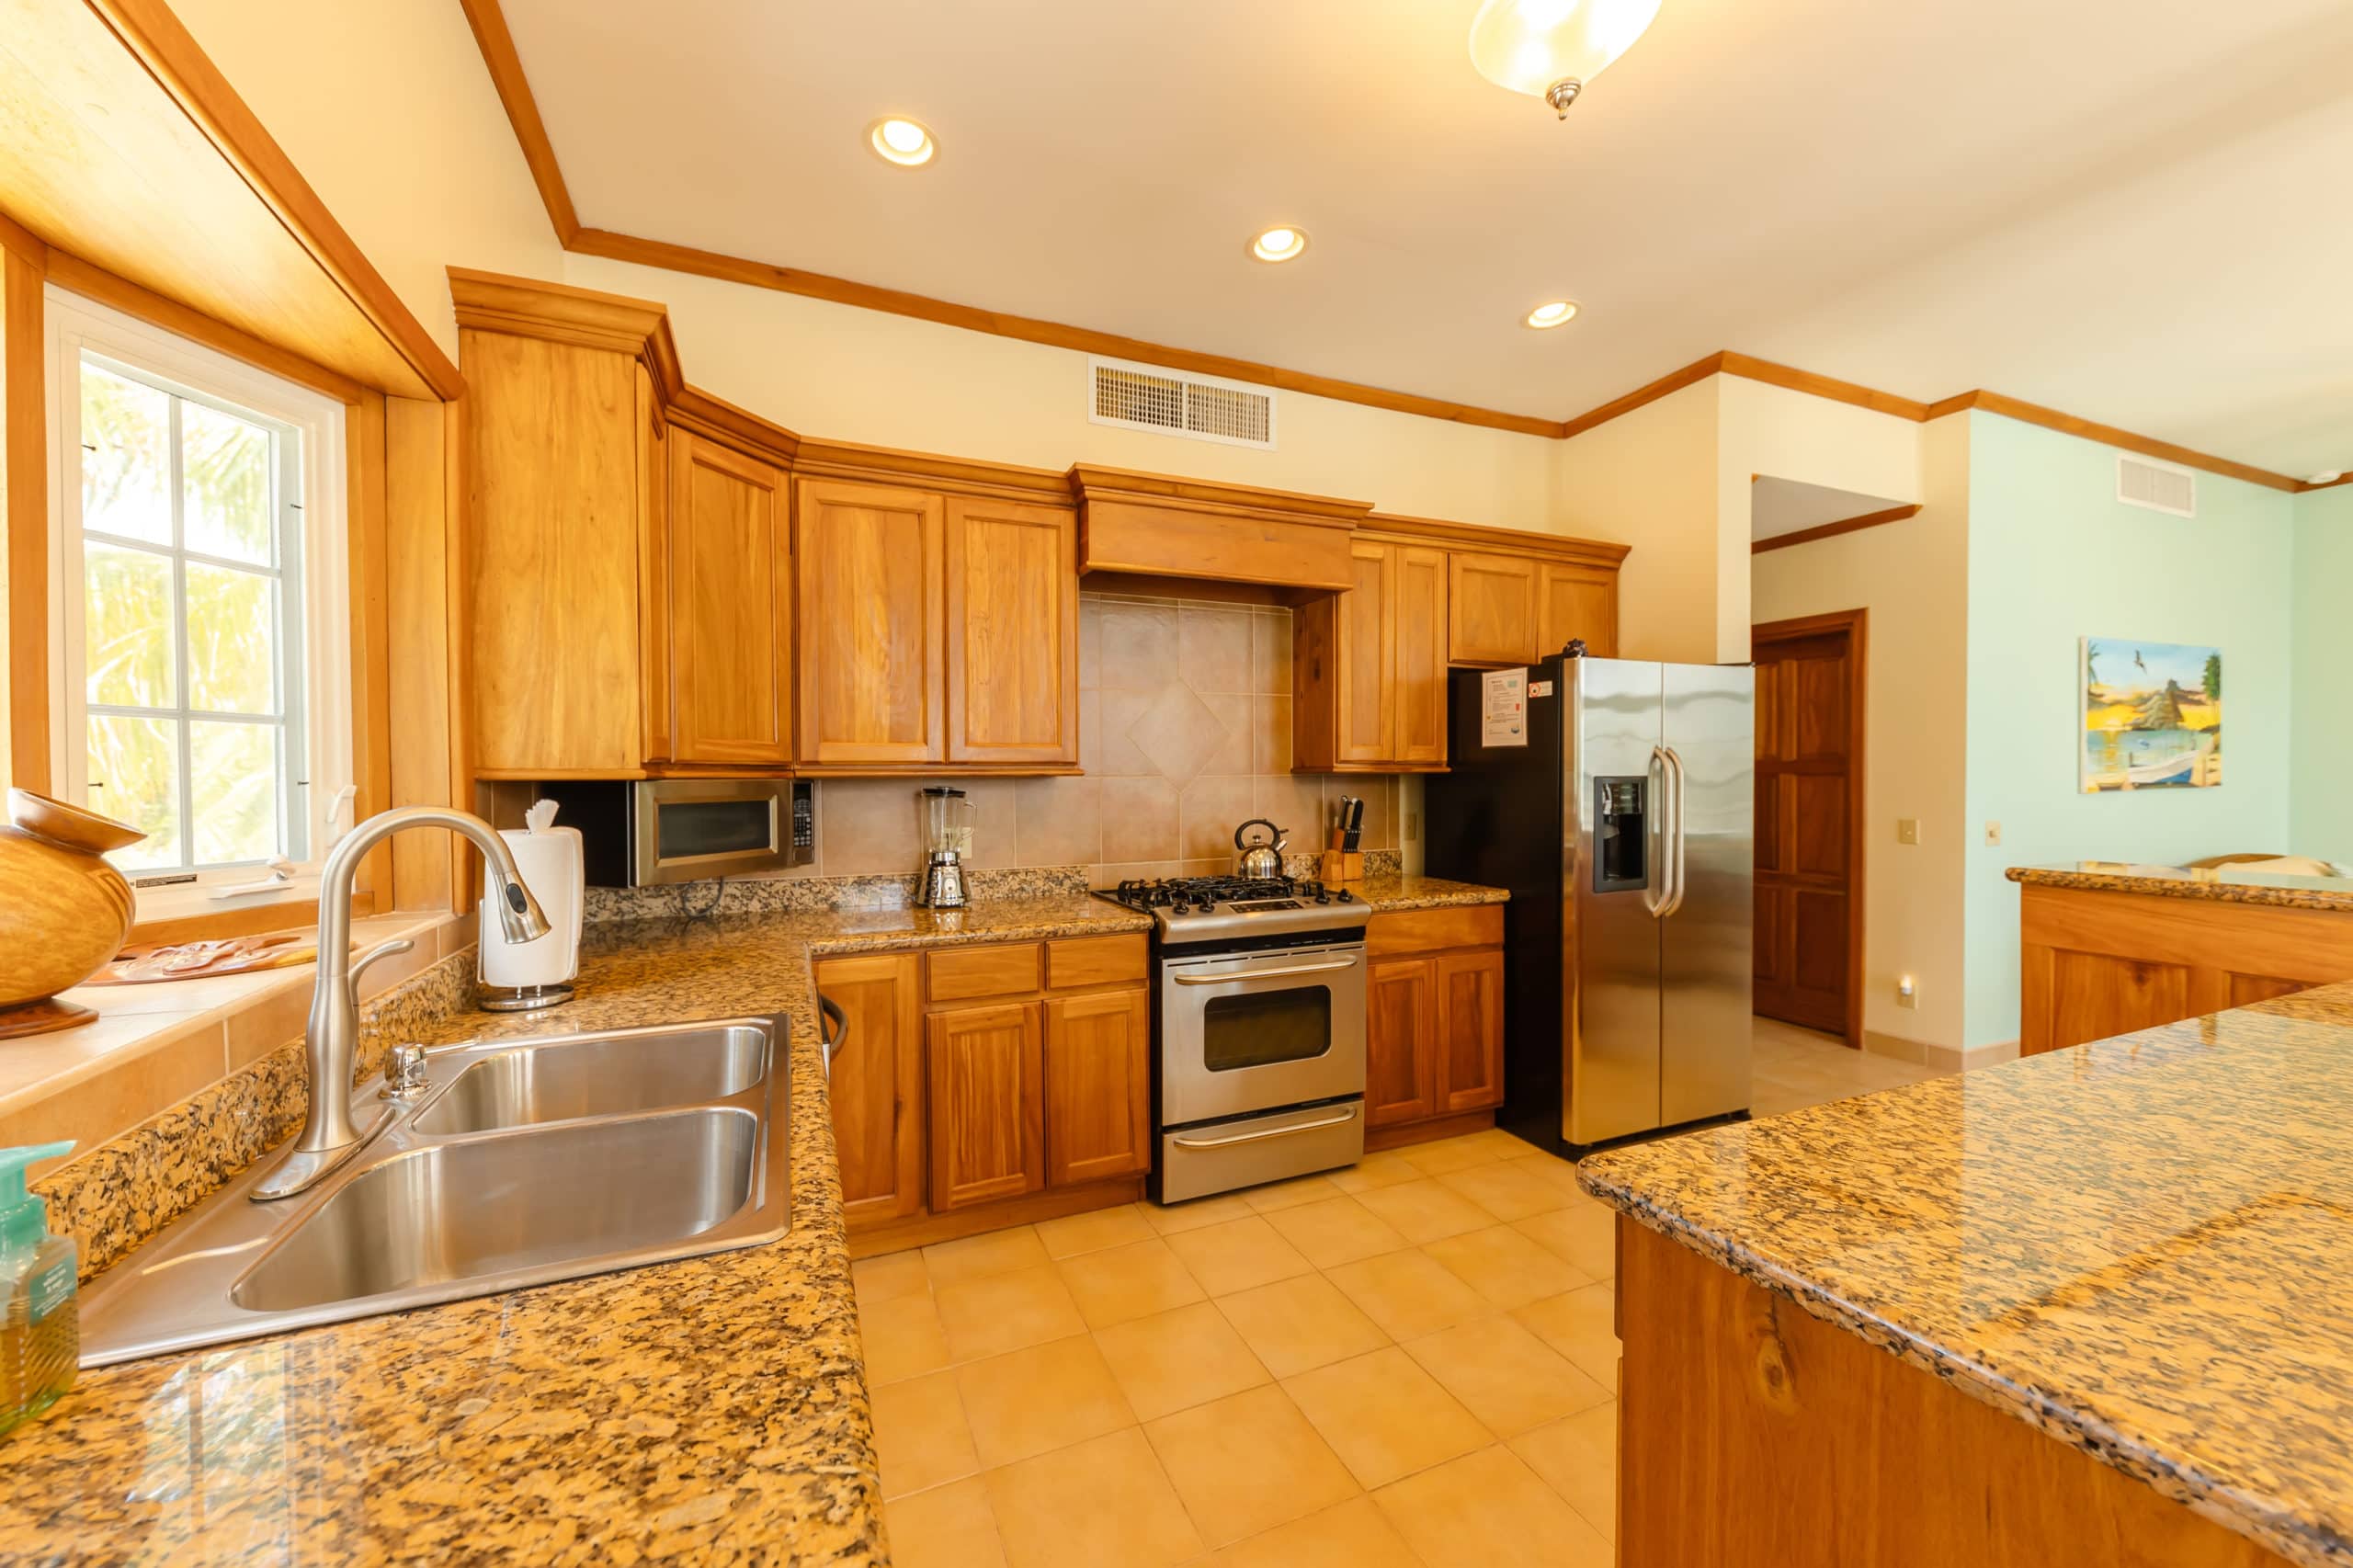 Modern kitchen with stainless steel appliances, granite countertops, and all the necessary cooking essentials, providing a convenient and functional space for meal preparation.